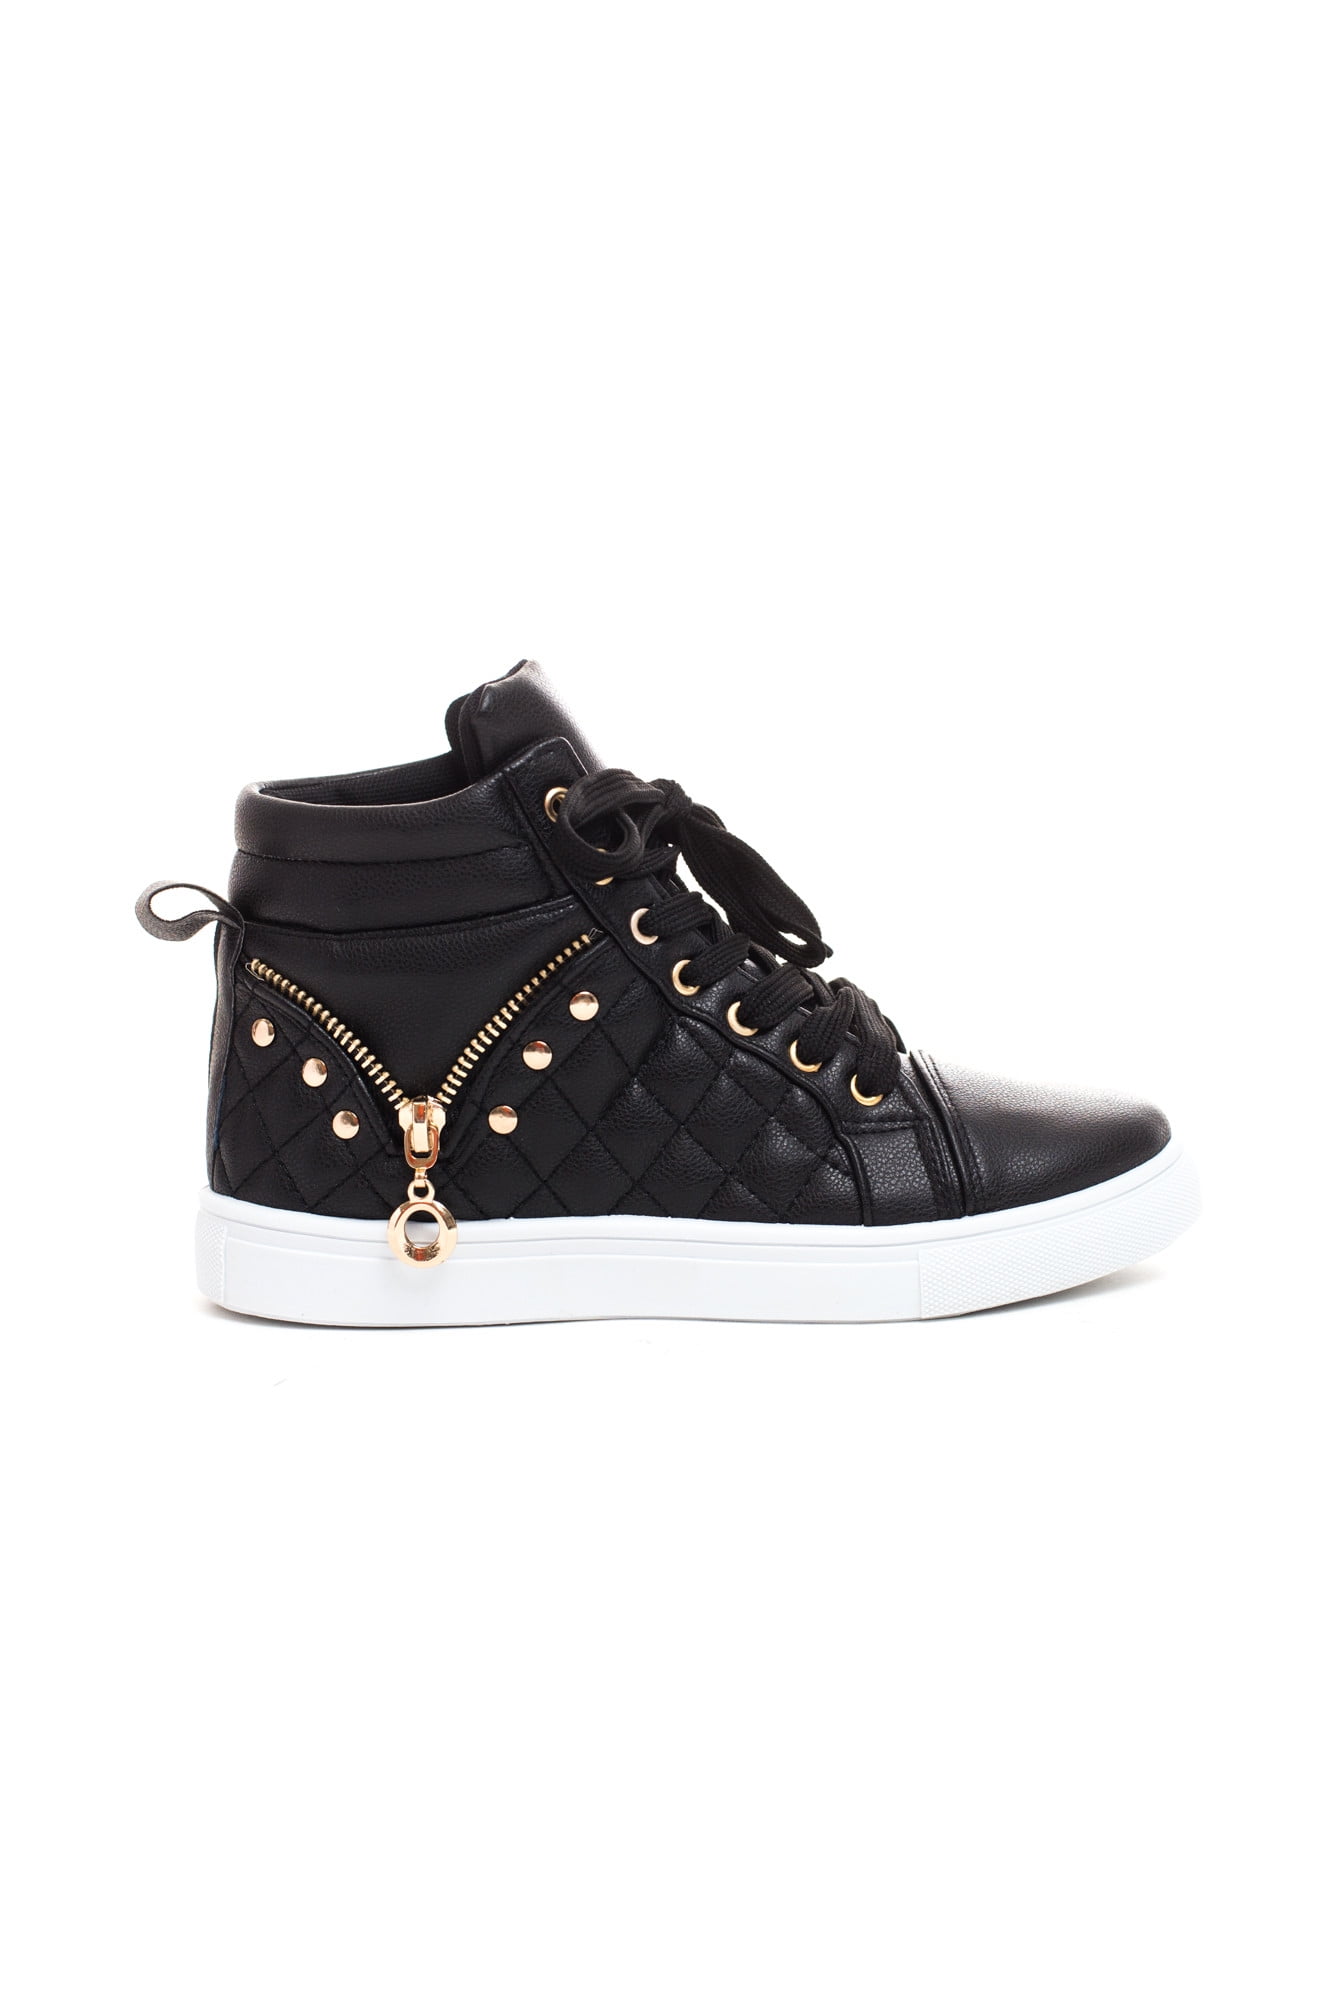 soho shoes women's leatherette quilted lace up high top sneakers ...